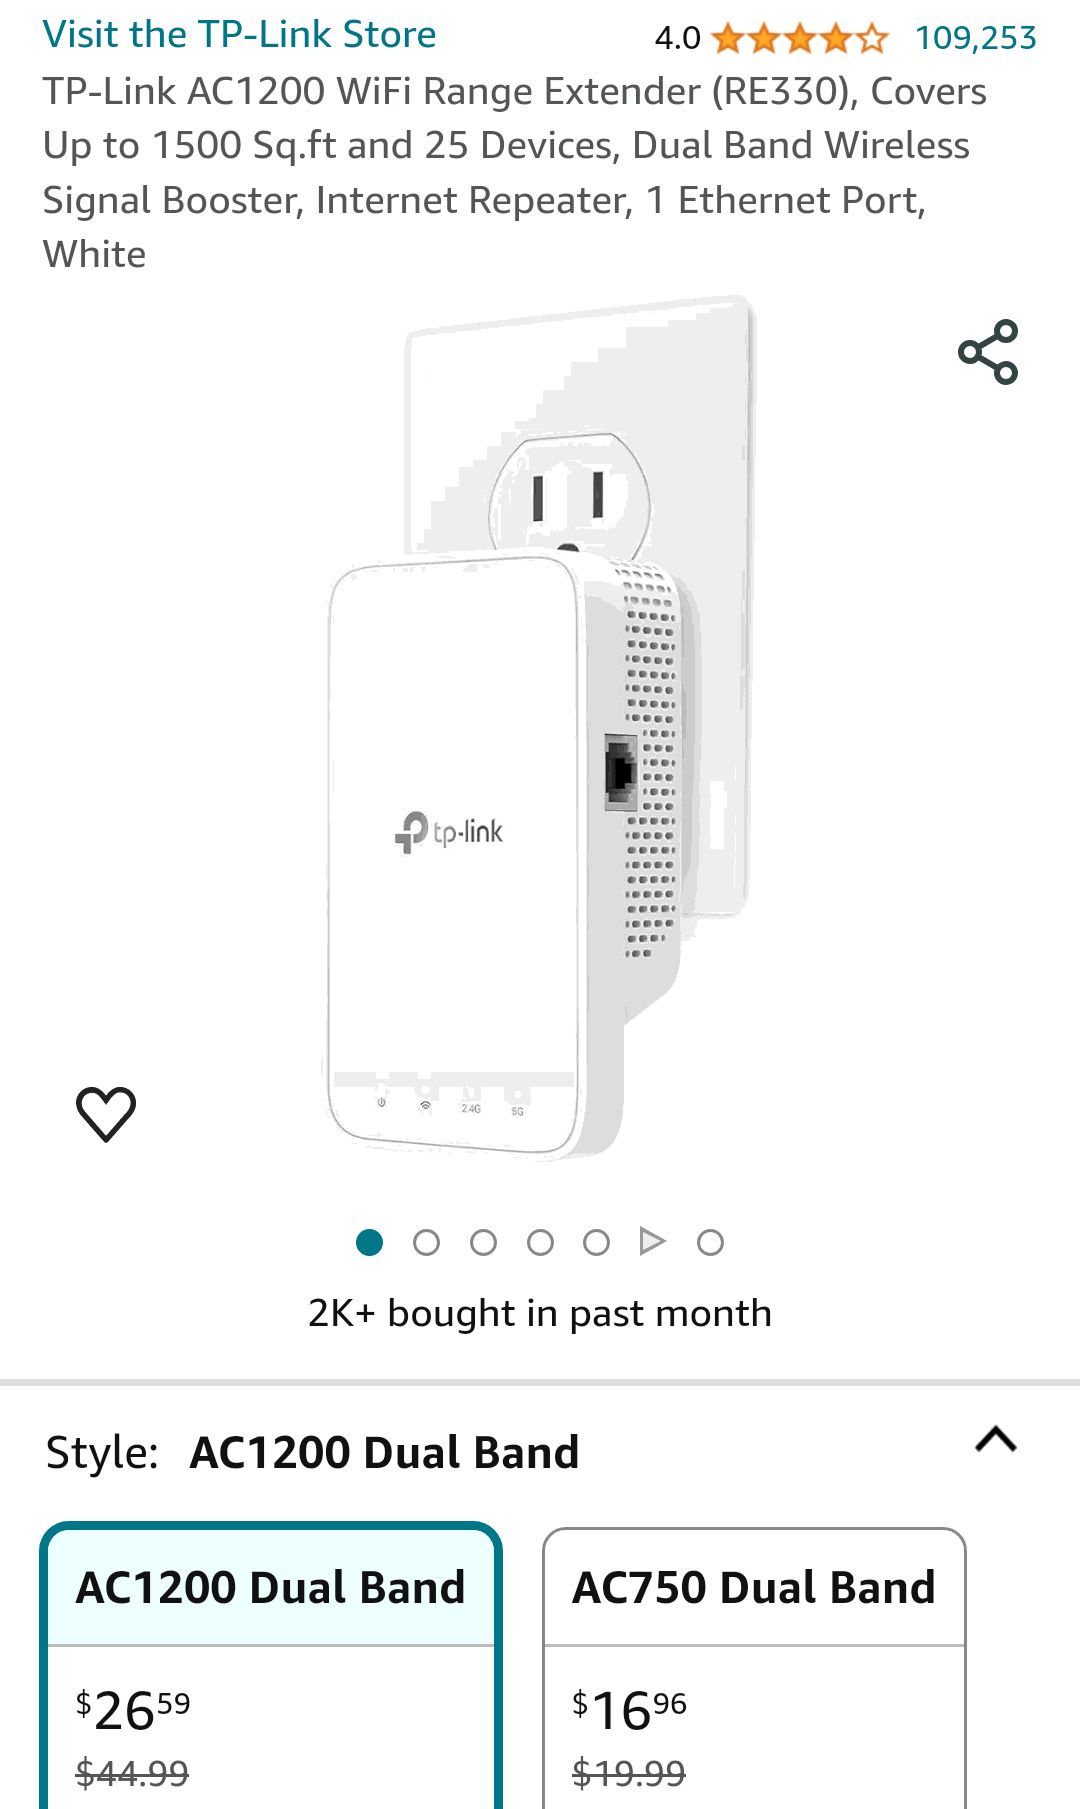 TP-Link AC1200 WiFi Range Extender (RE330), Covers Up to 1500 Sq.ft and 25 Devices, Dual Band Wireless Signal Booster, Internet Repeater, 1 Ethernet Port, White : Electronics